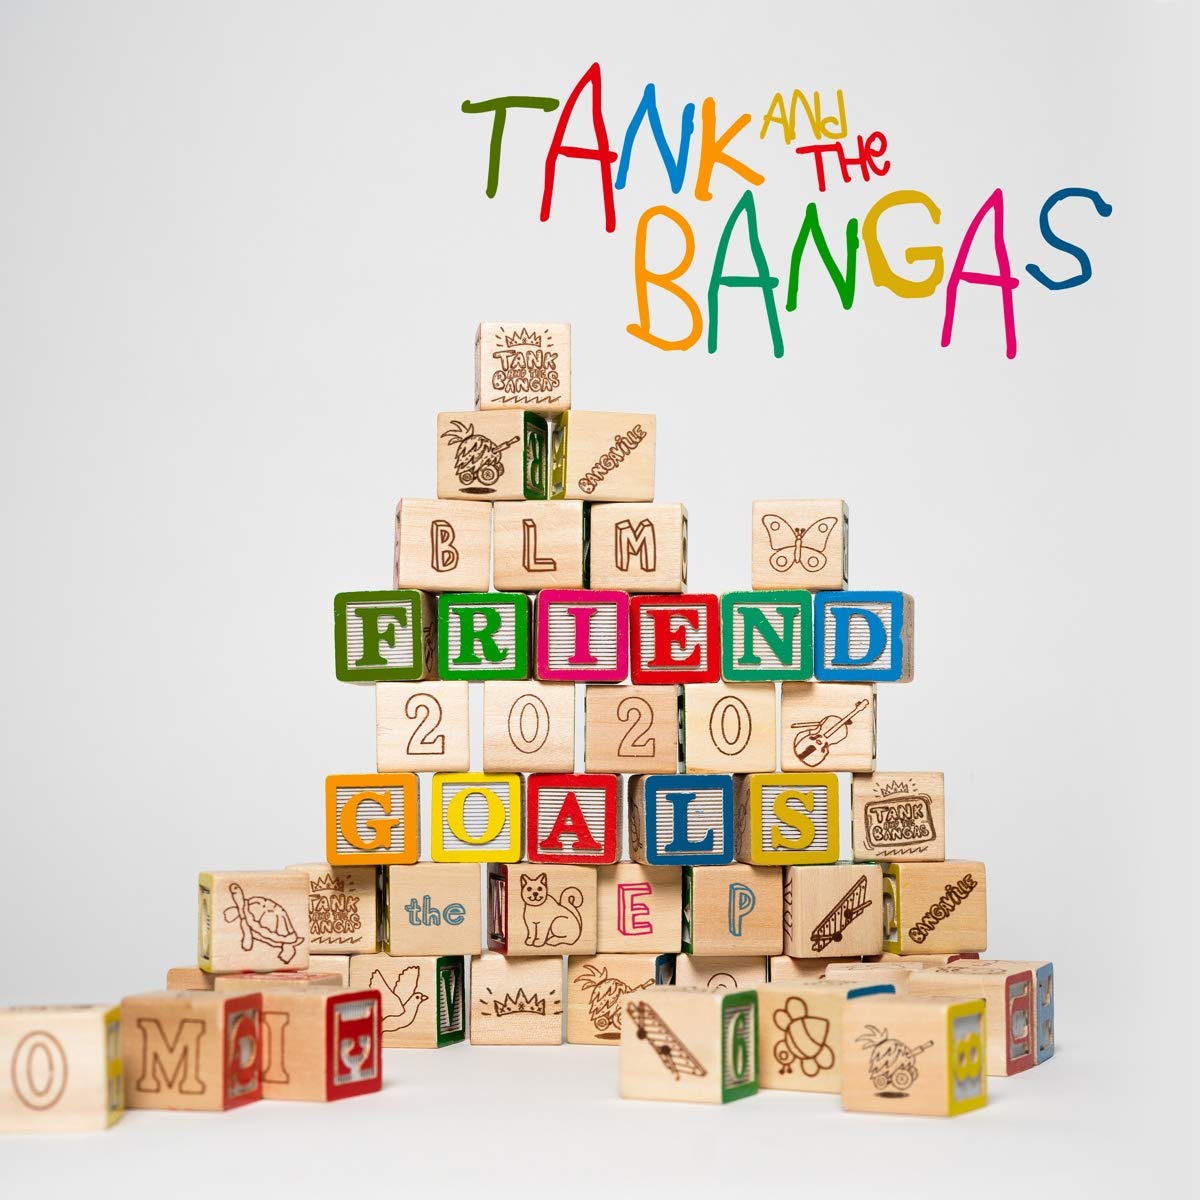 TANK AND THE BANGAS - FRIEND GOALS Vinyl 12" EP